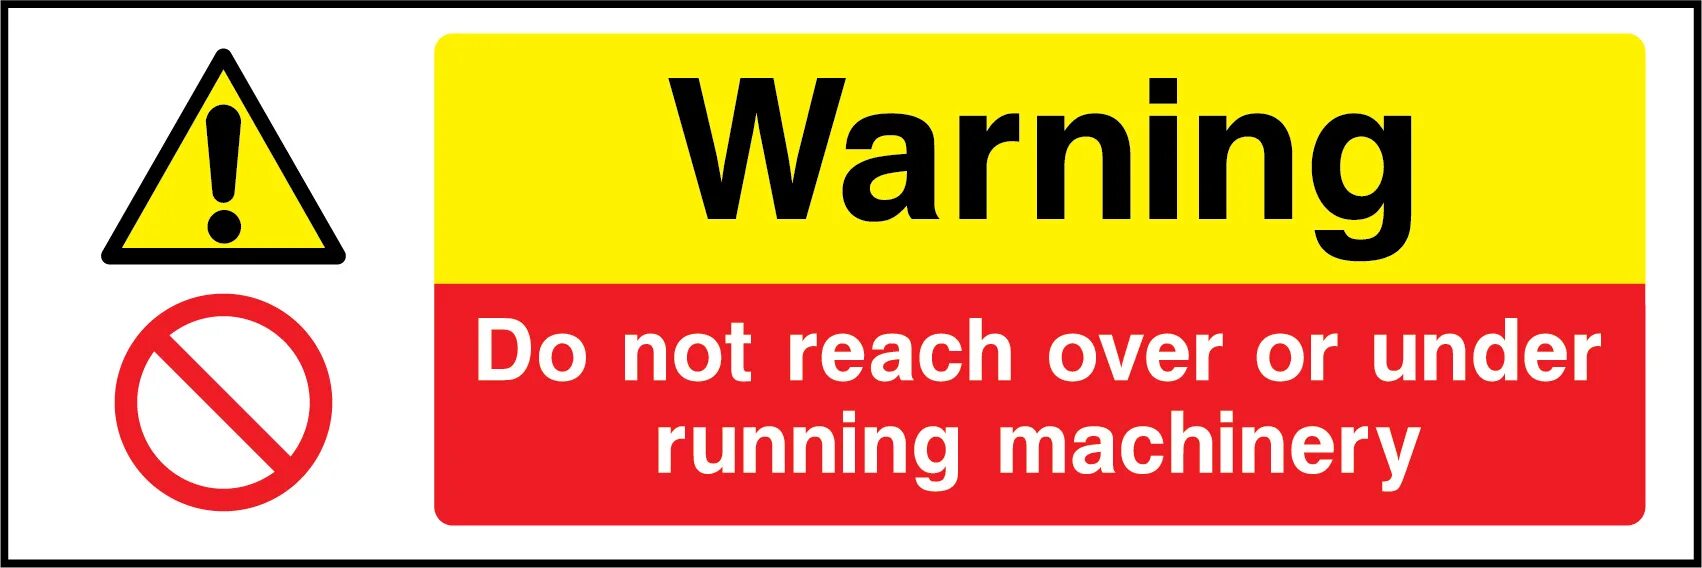 Do not carry out Maintenance work on Running Machinery. Знак do not carry. Знаки Warning Machinery operating. Warning сообщение.